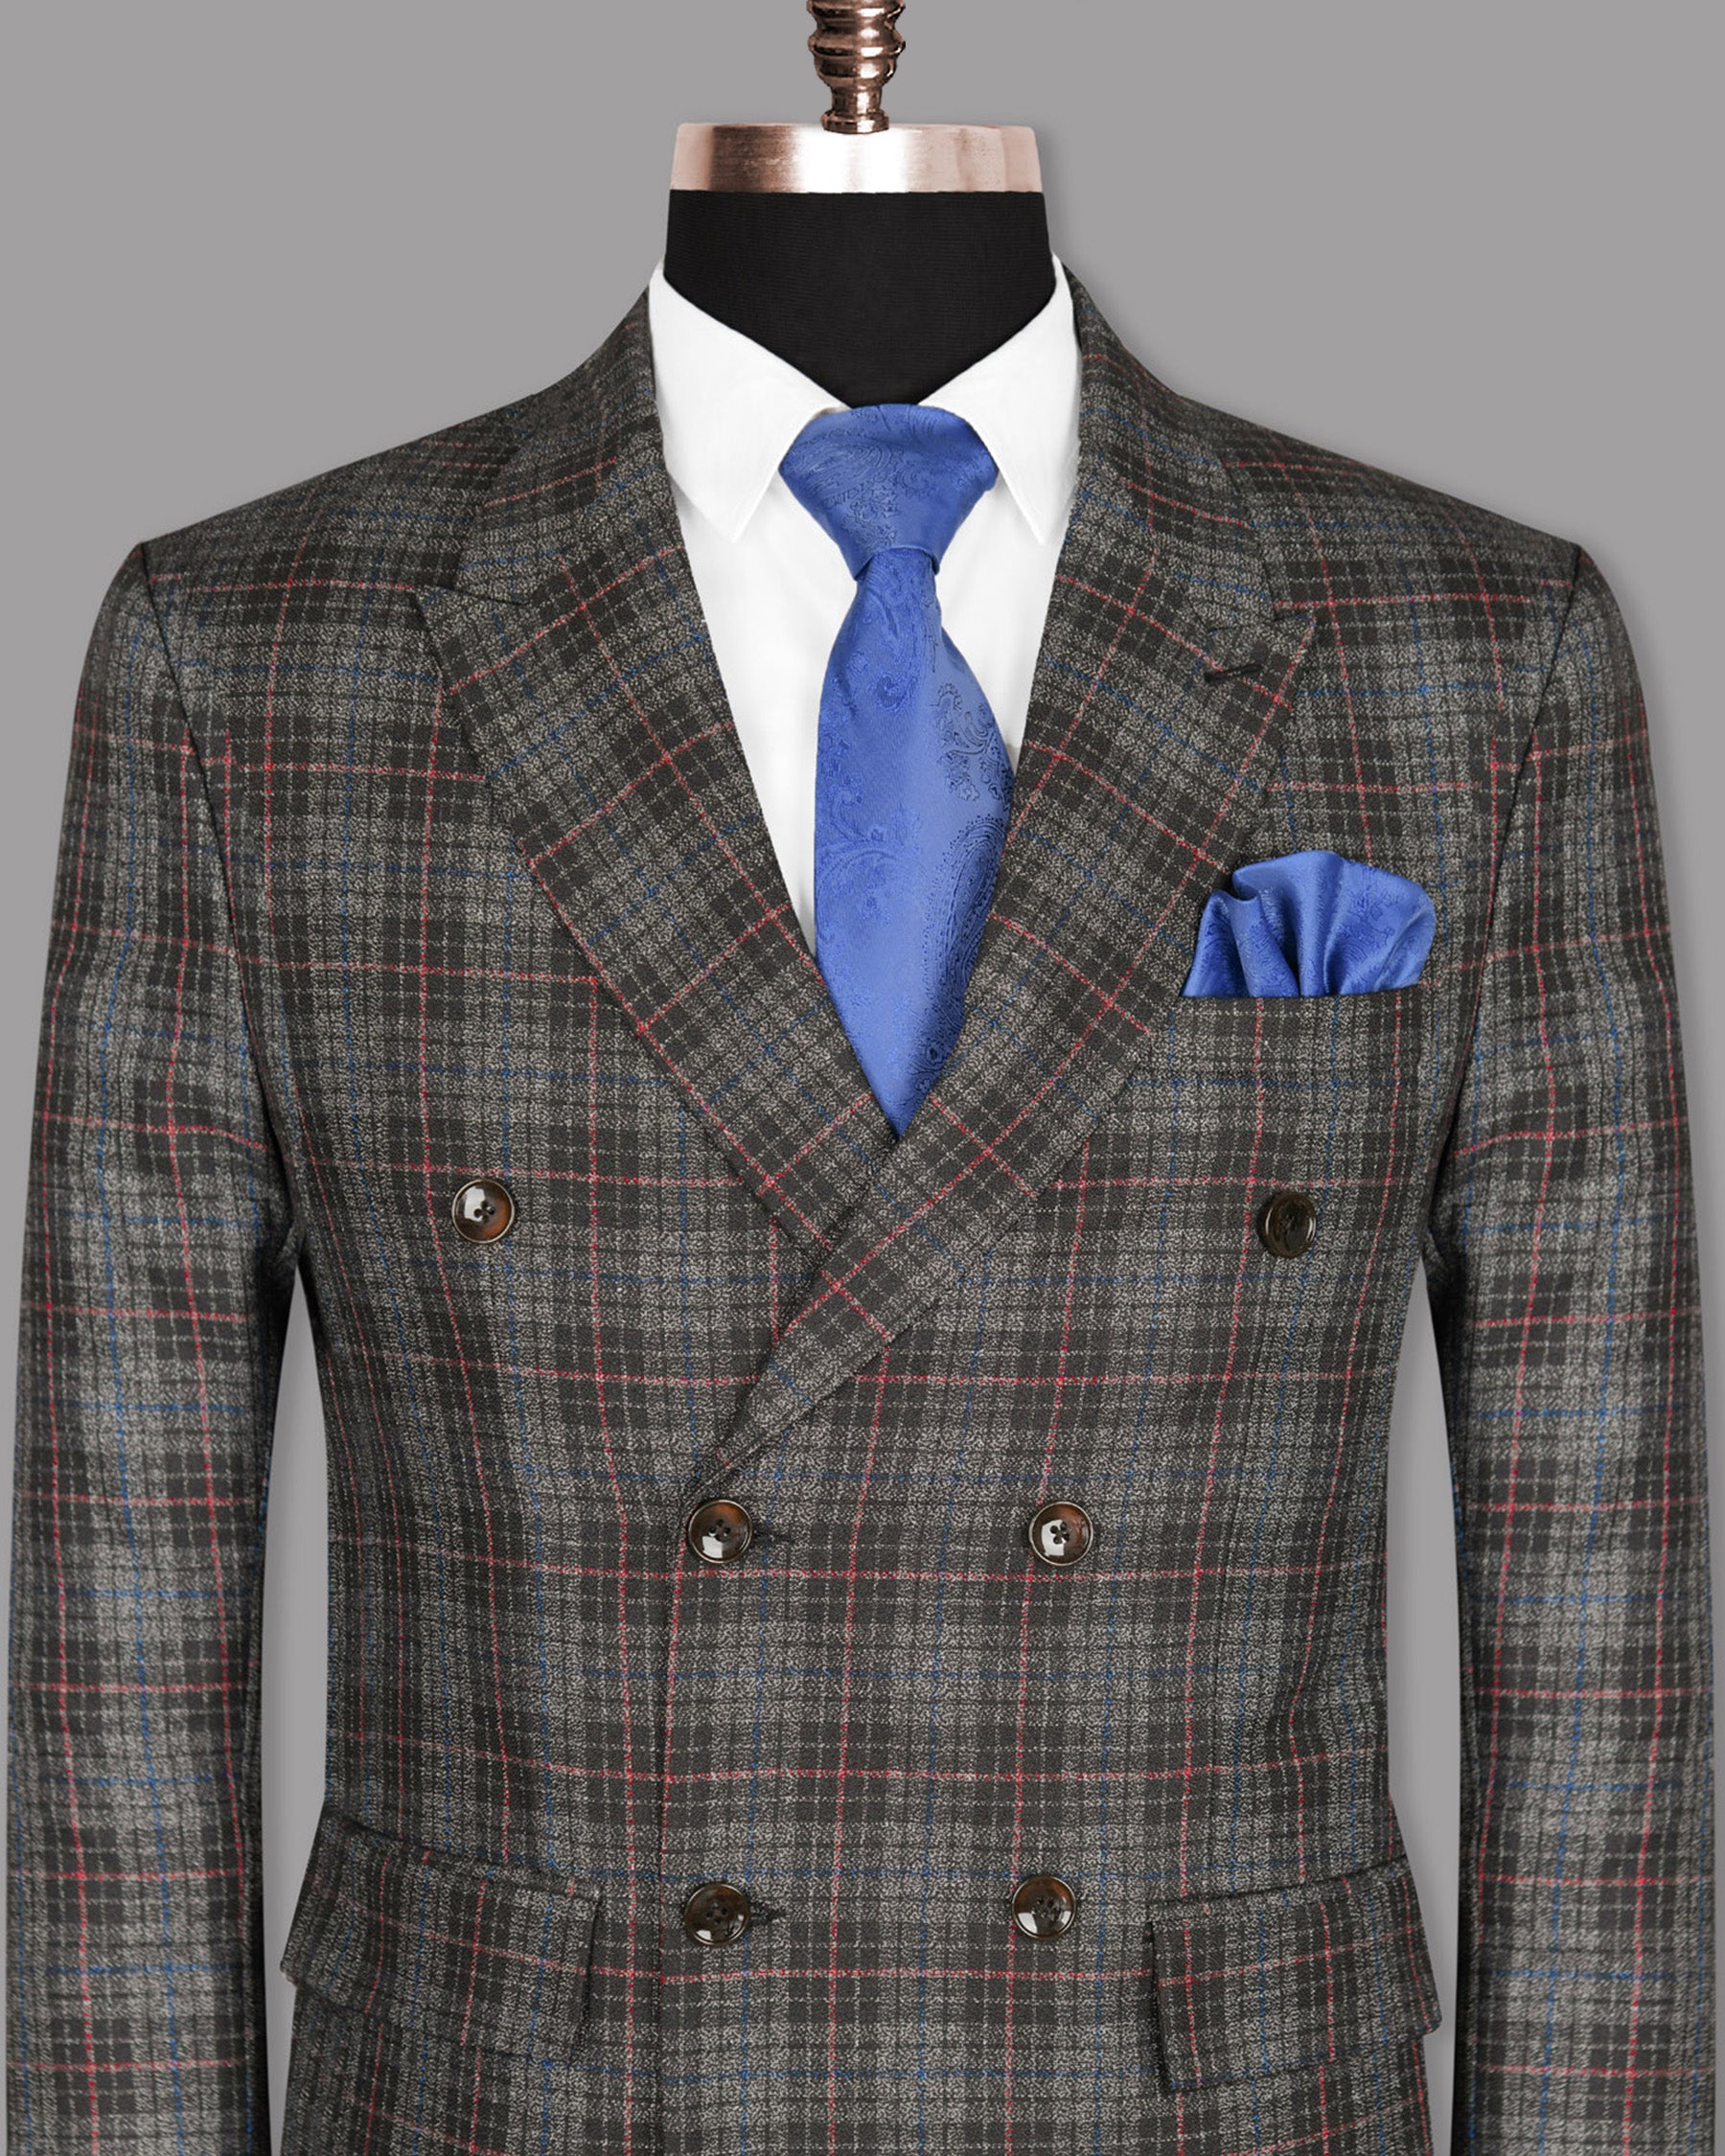 Charcoal Windowpane Wool Rich Double Breasted Blazer BL922-DB-46, BL922-DB-48, BL922-DB-52, BL922-DB-54, BL922-DB-56, BL922-DB-38, BL922-DB-36, BL922-DB-50, BL922-DB-60, BL922-DB-58, BL922-DB-40, BL922-DB-42, BL922-DB-44